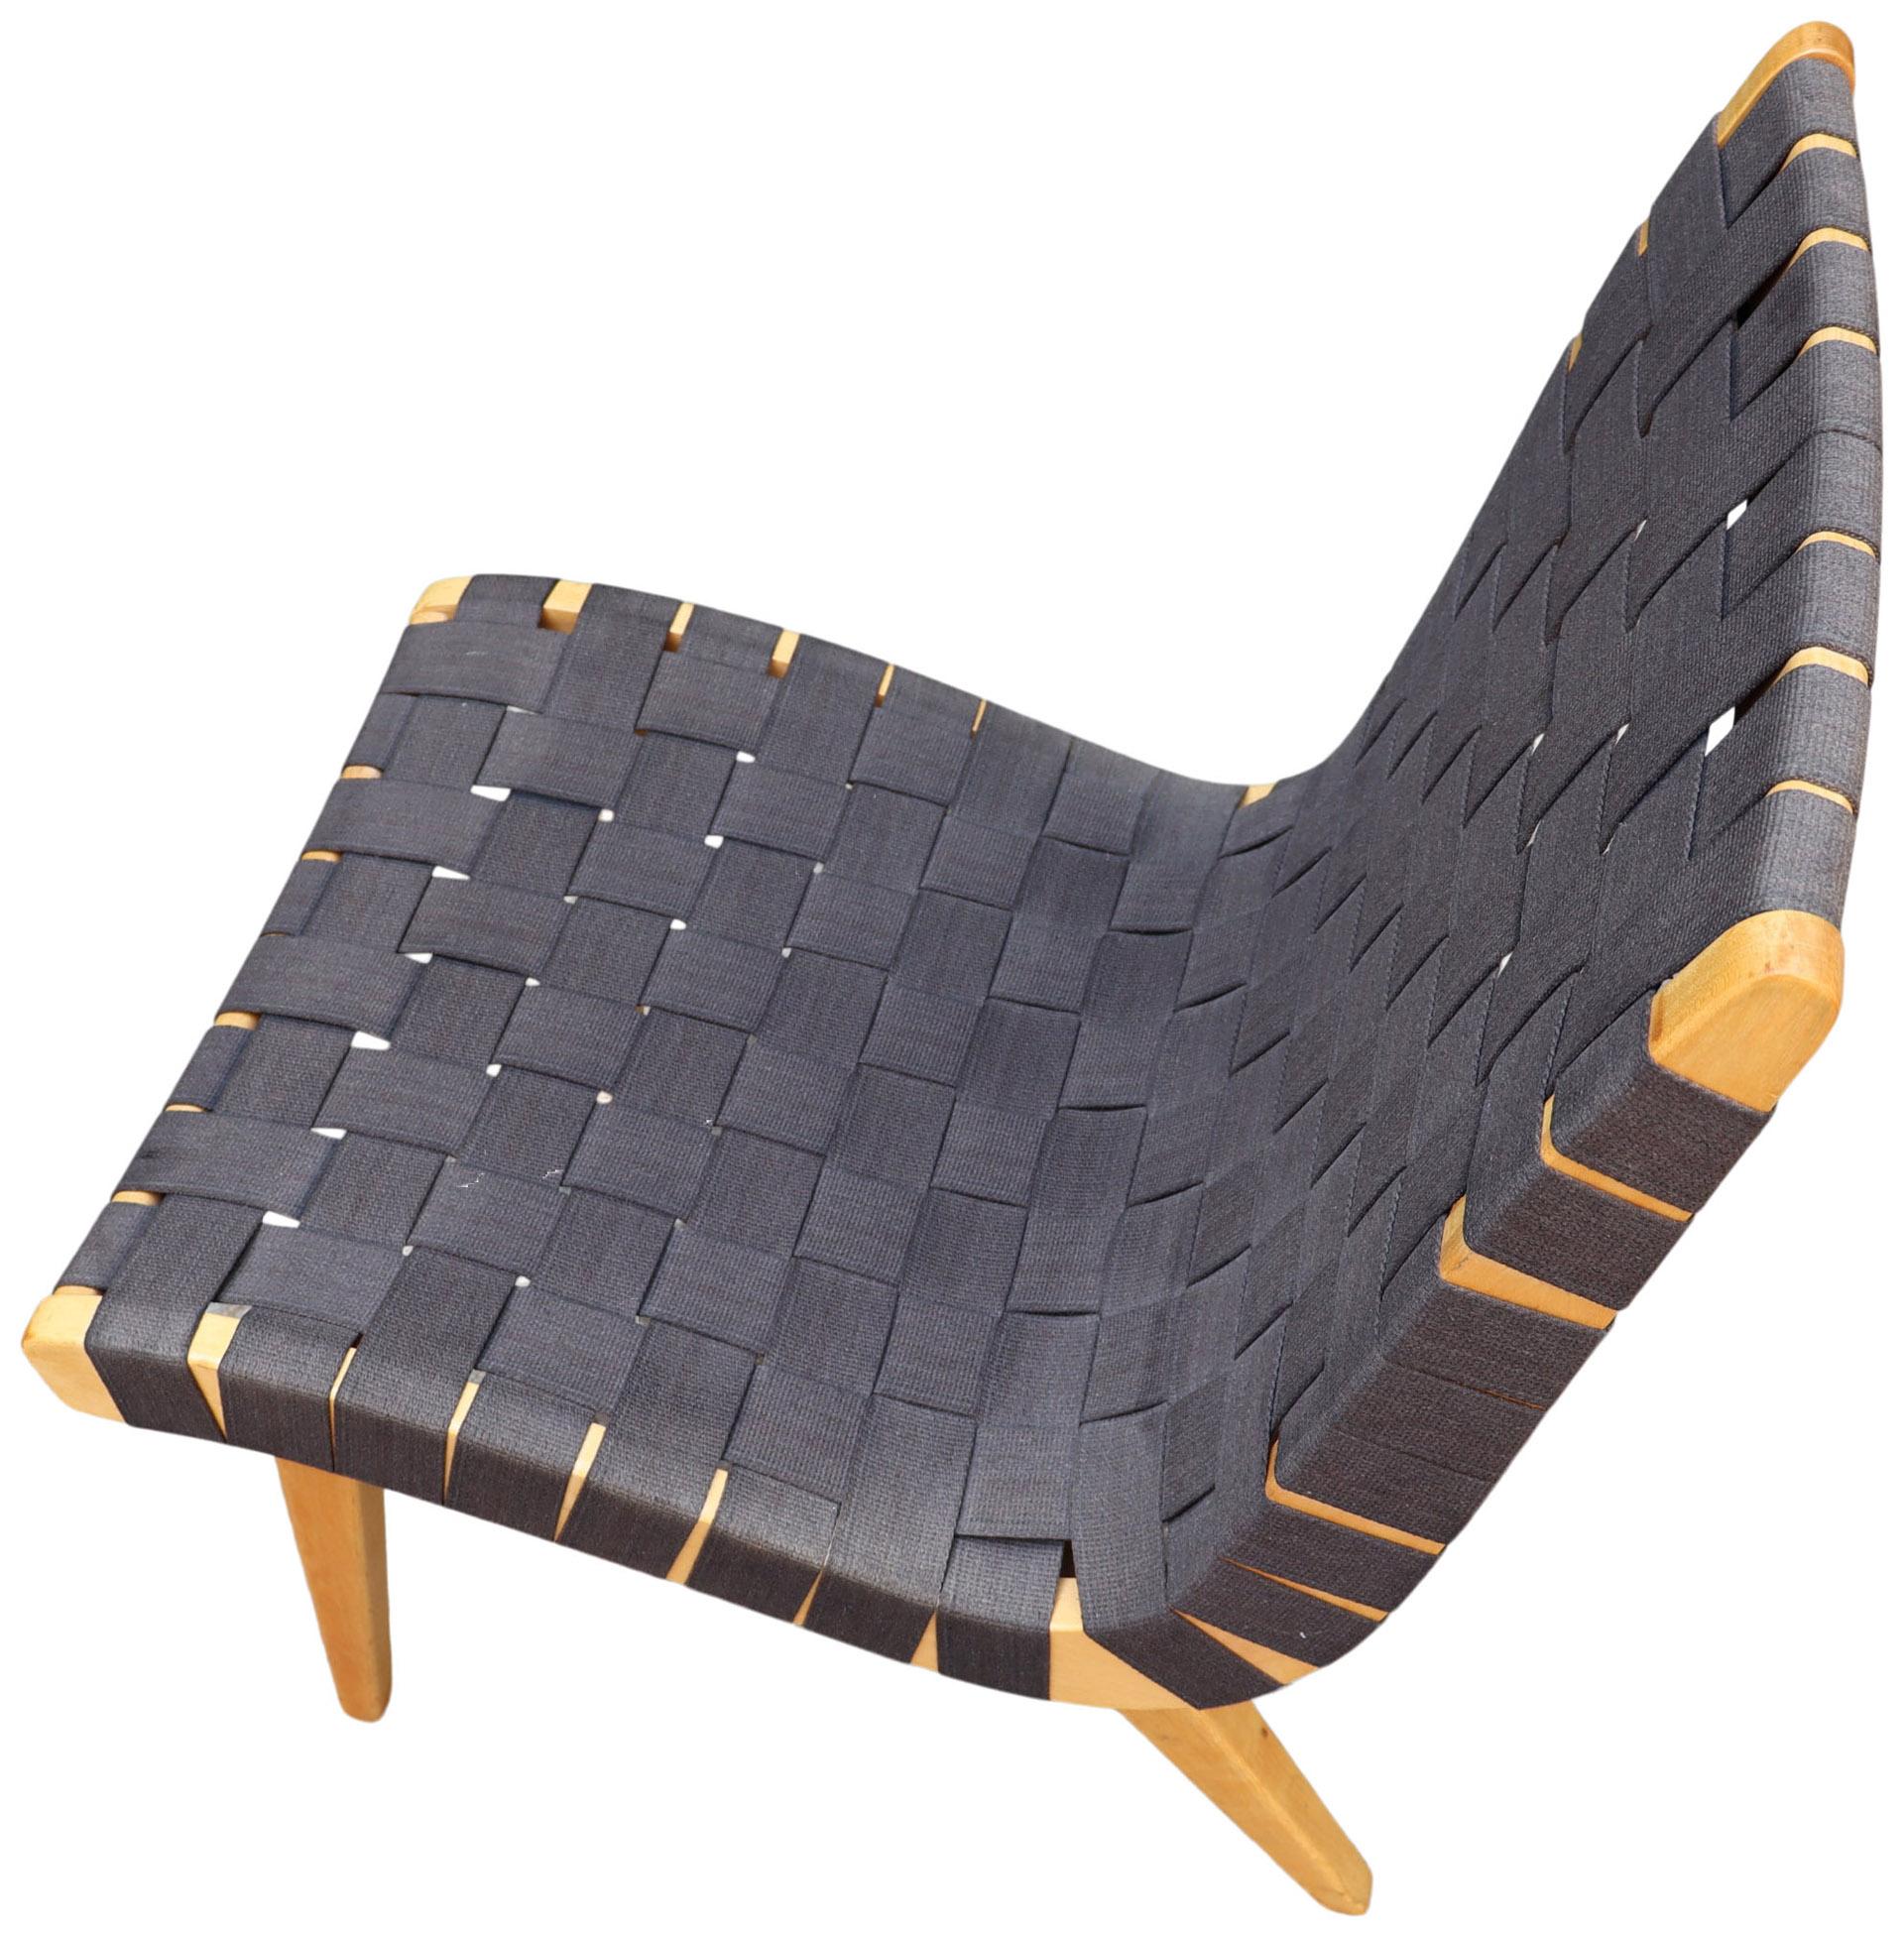 American Midcentury Jens Risom Lounge Chair for Knoll